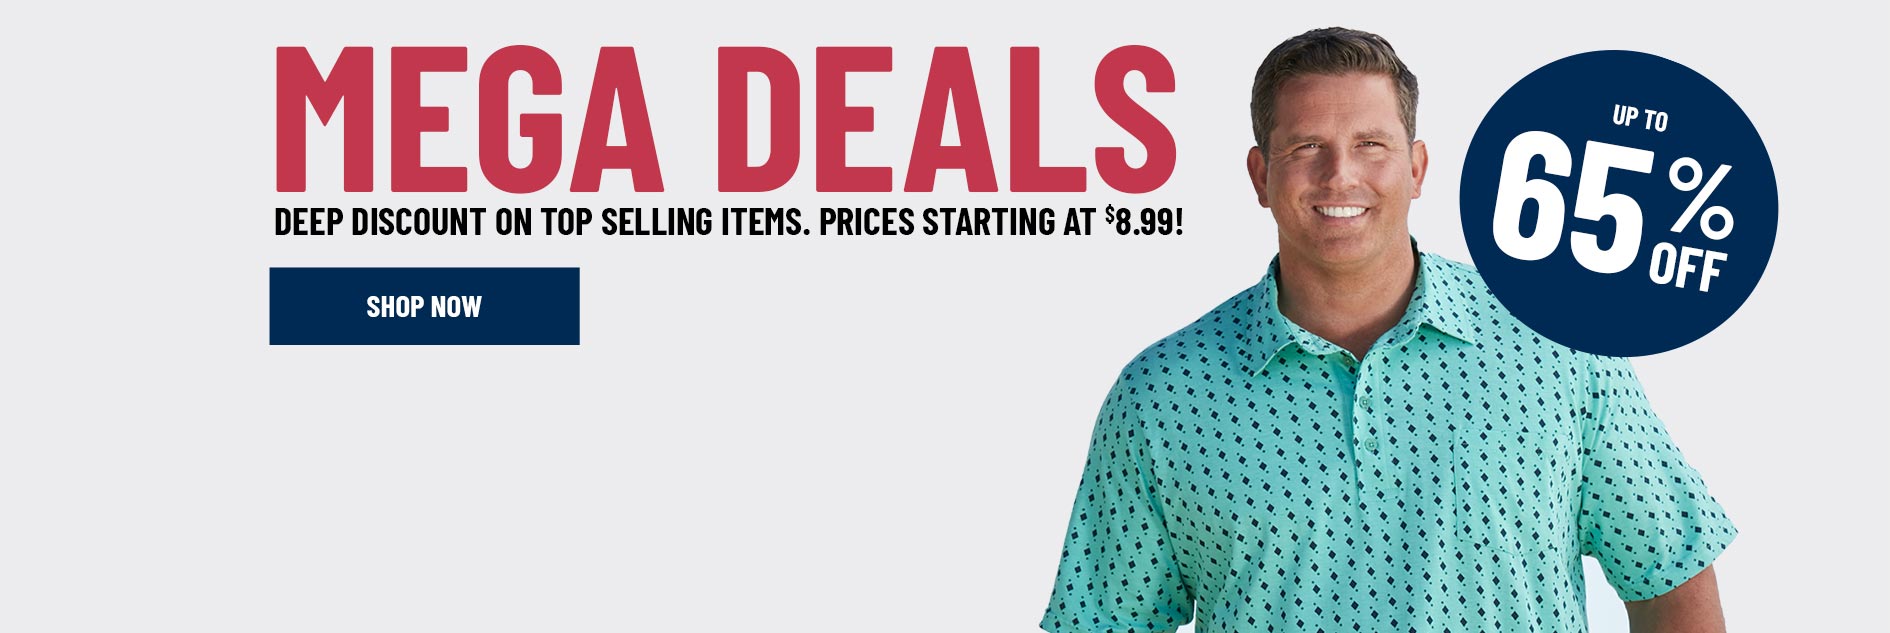 Mega Deals deep discount on top selling items. prices starting at $8.99! Shop now